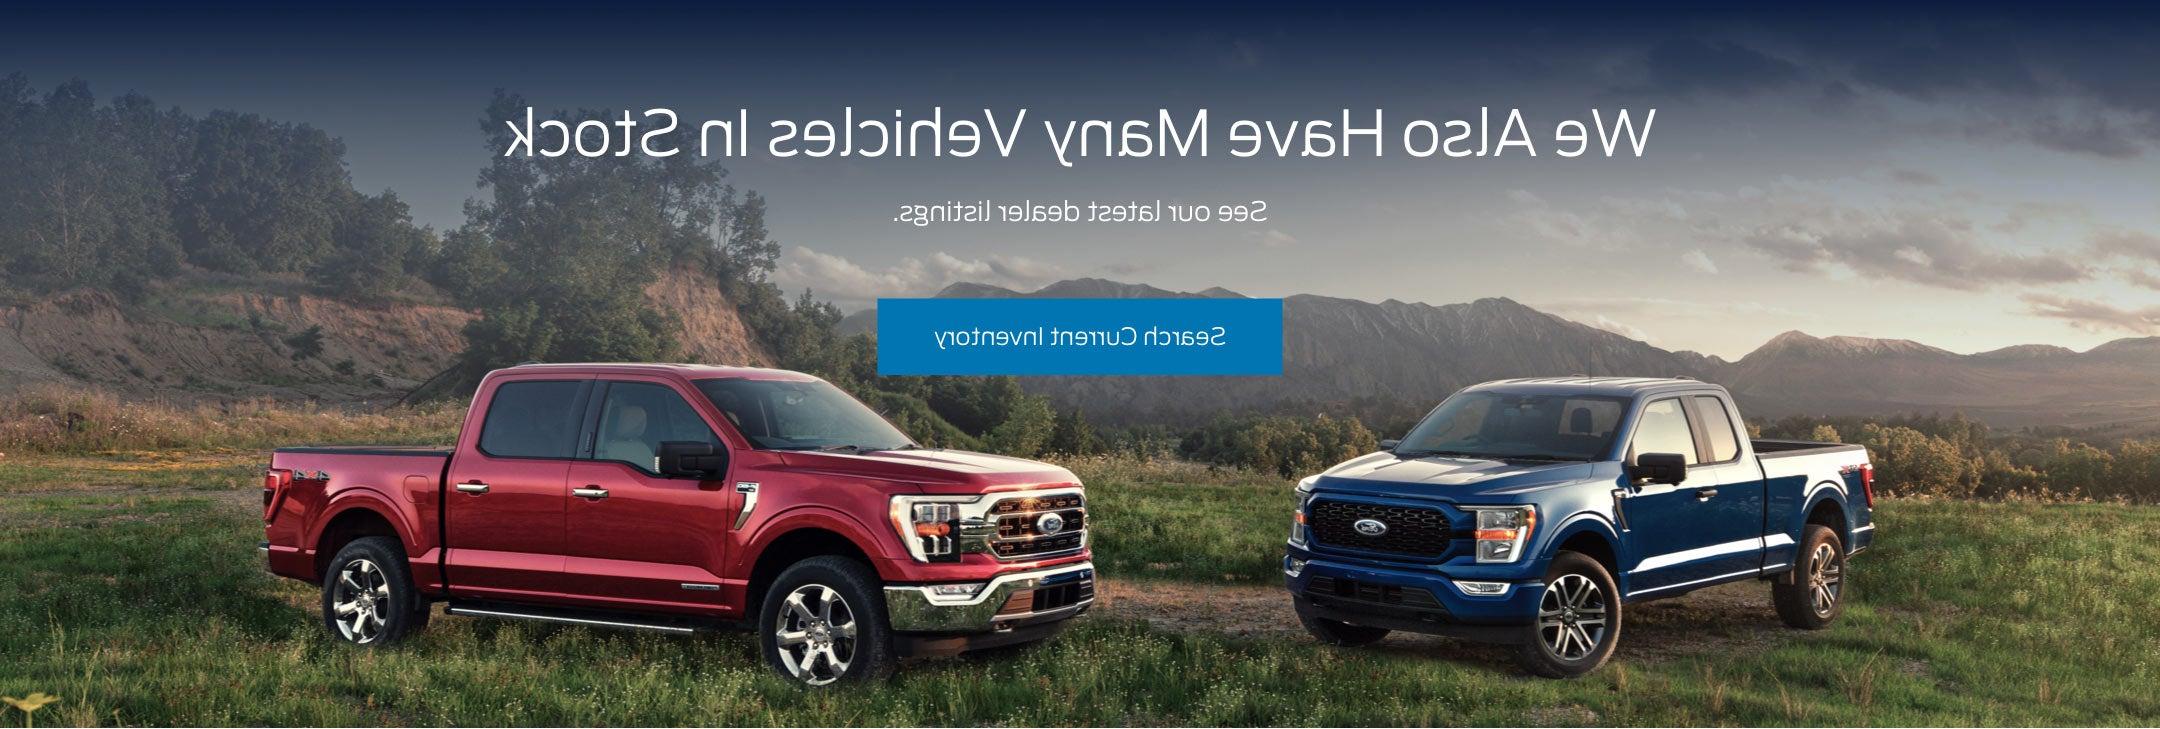 Ford vehicles in stock | Roseau County Ford in Roseau MN